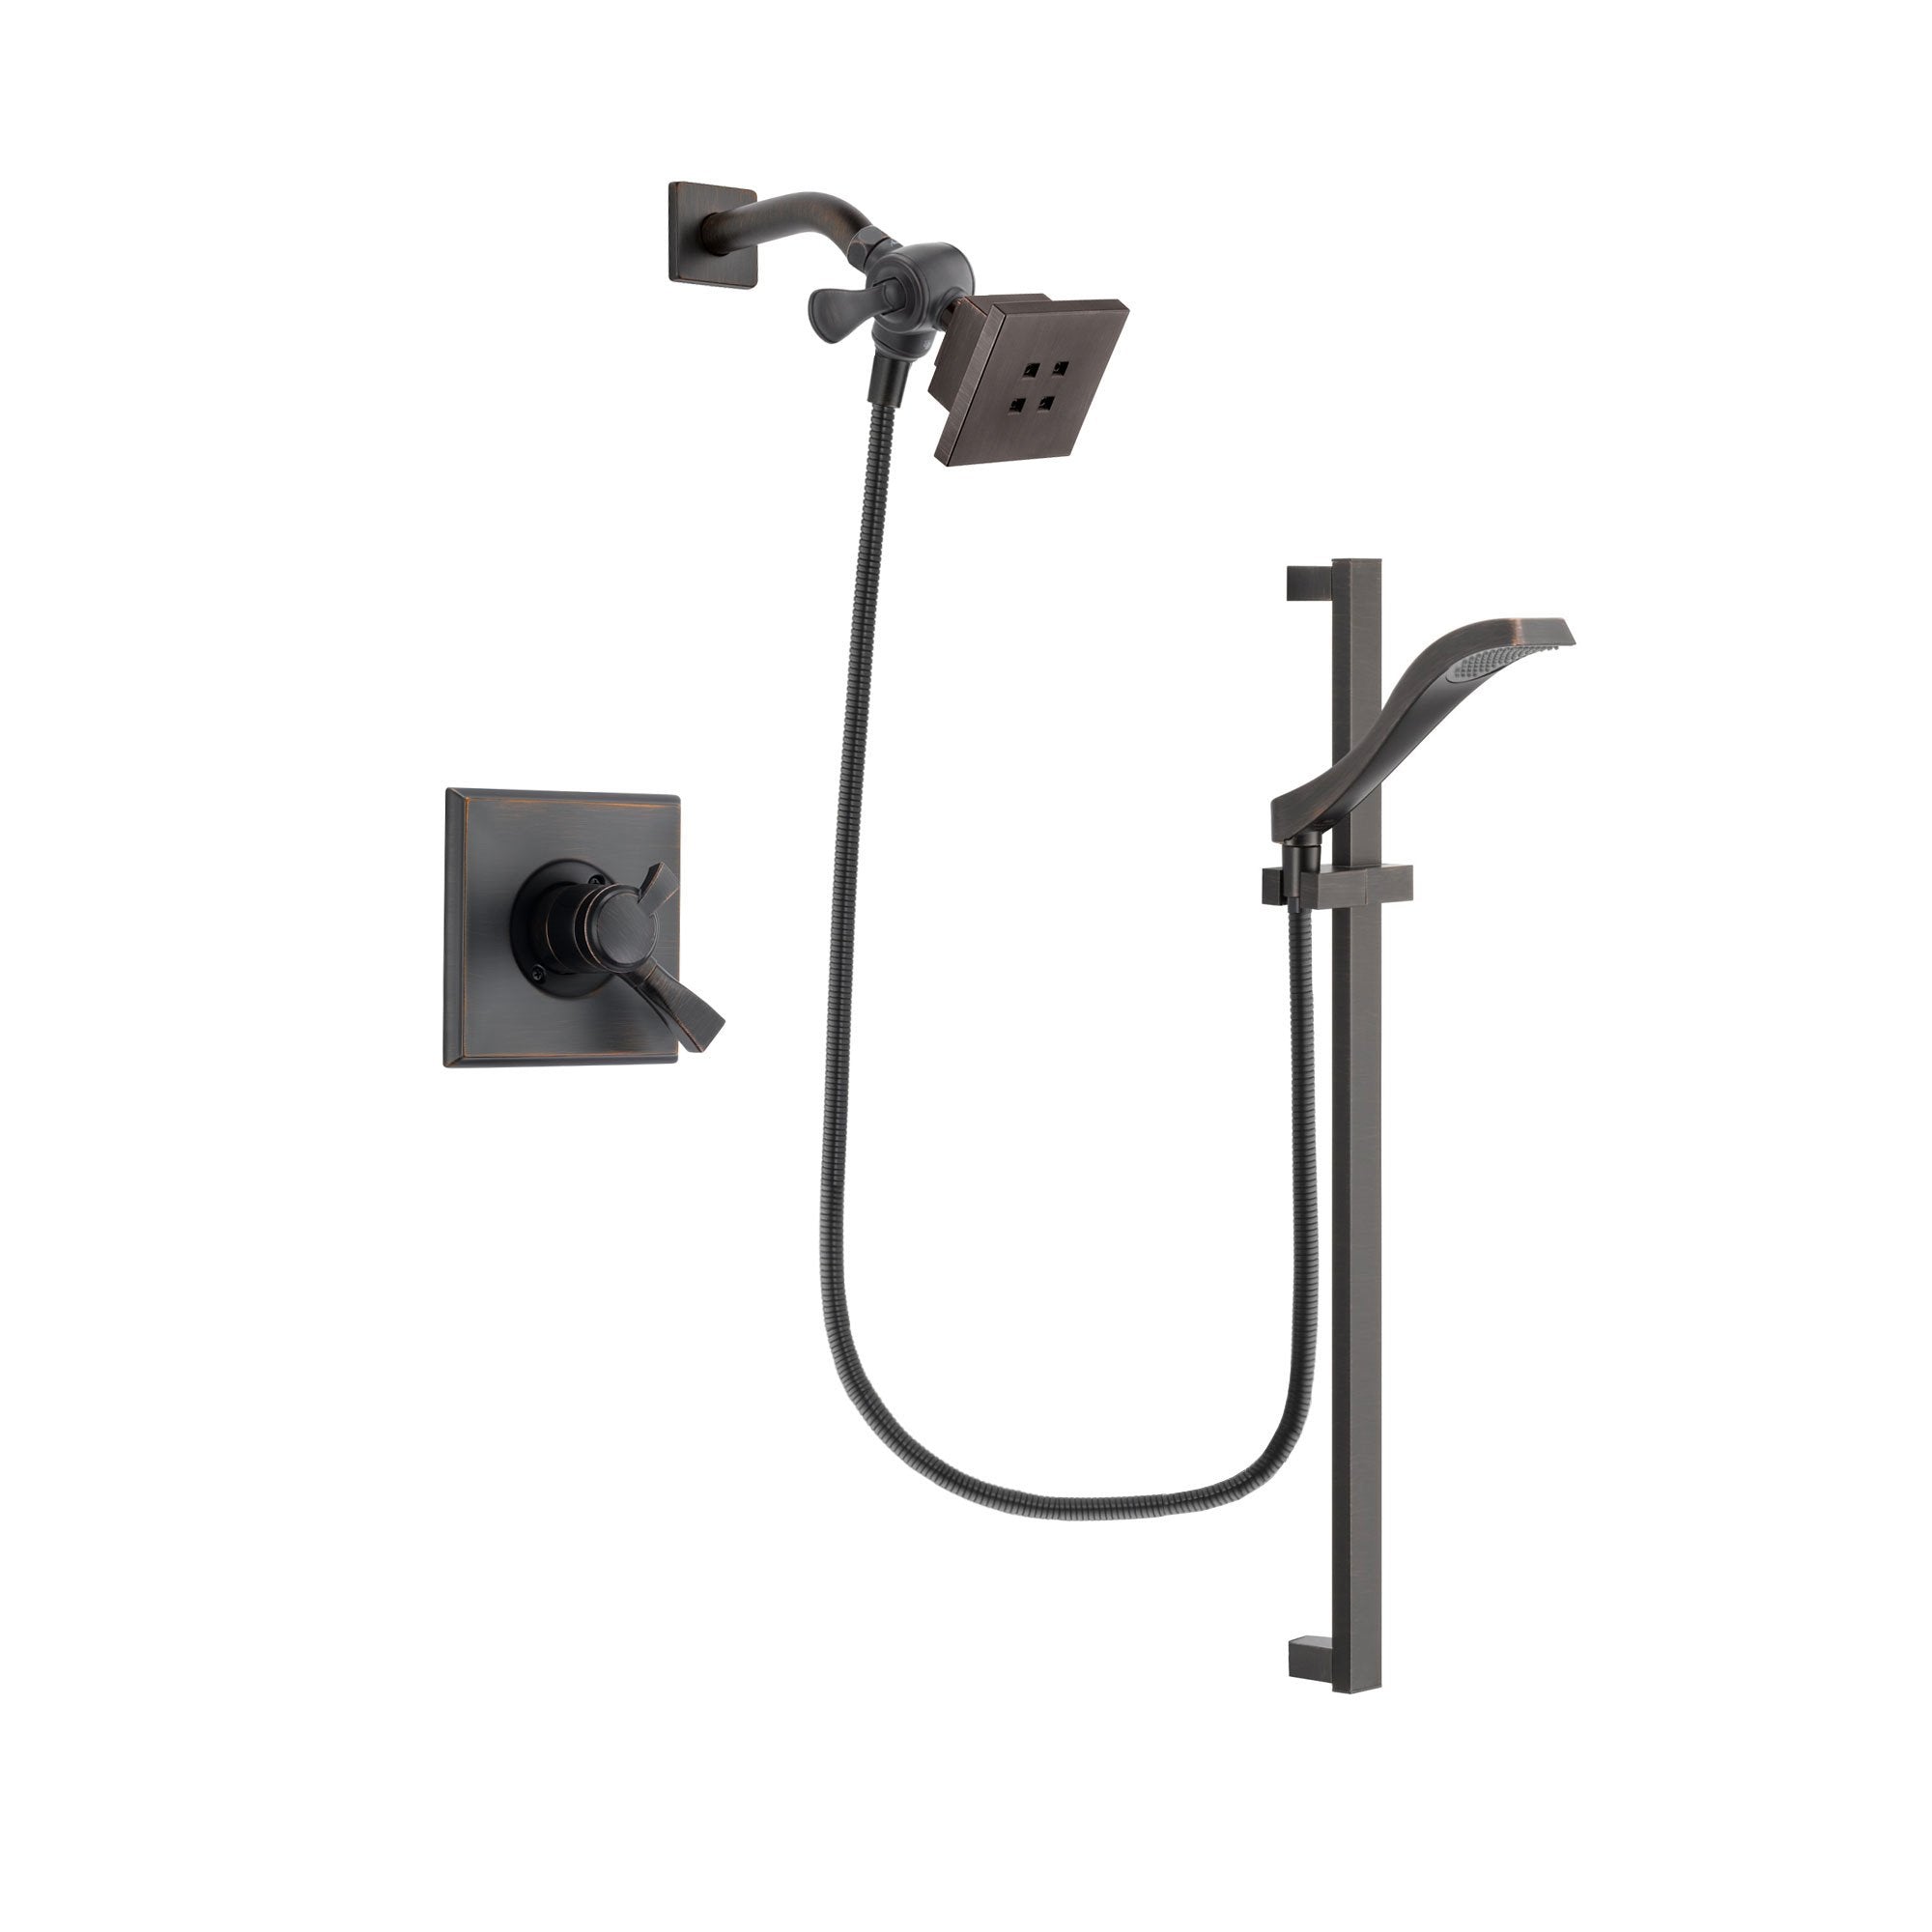 Delta Dryden Venetian Bronze Finish Dual Control Shower Faucet System Package with Square Showerhead and Modern Handheld Shower Spray with Slide Bar Includes Rough-in Valve DSP3110V